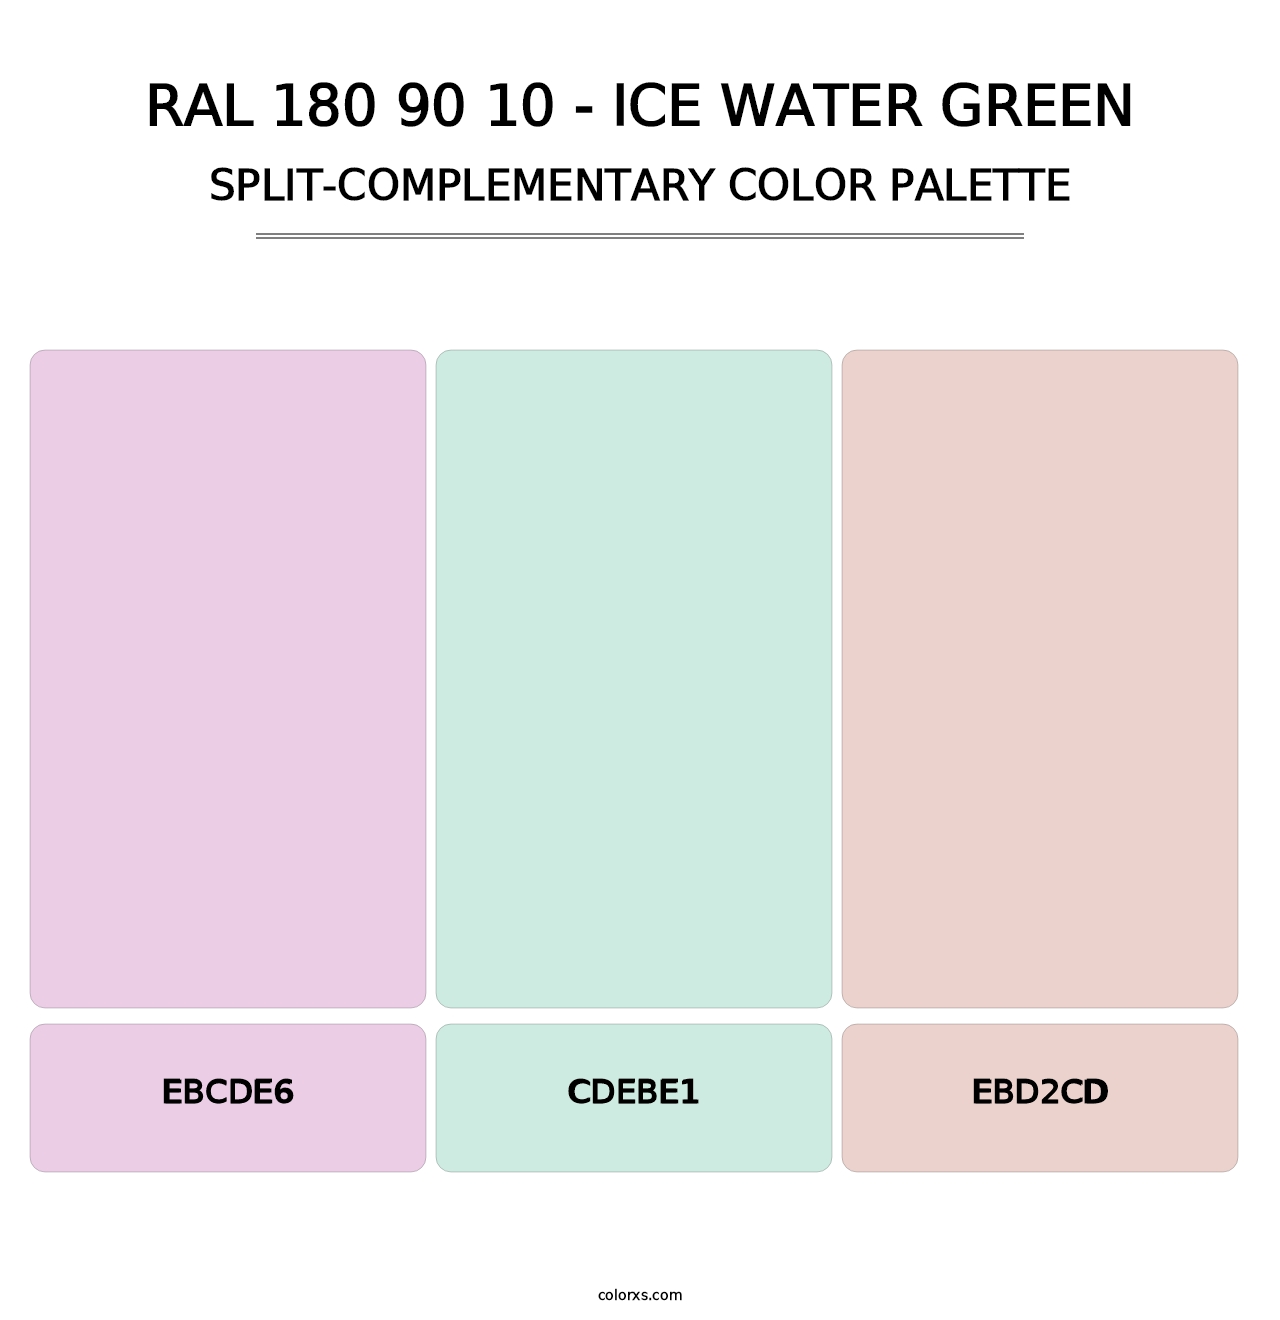 RAL 180 90 10 - Ice Water Green - Split-Complementary Color Palette